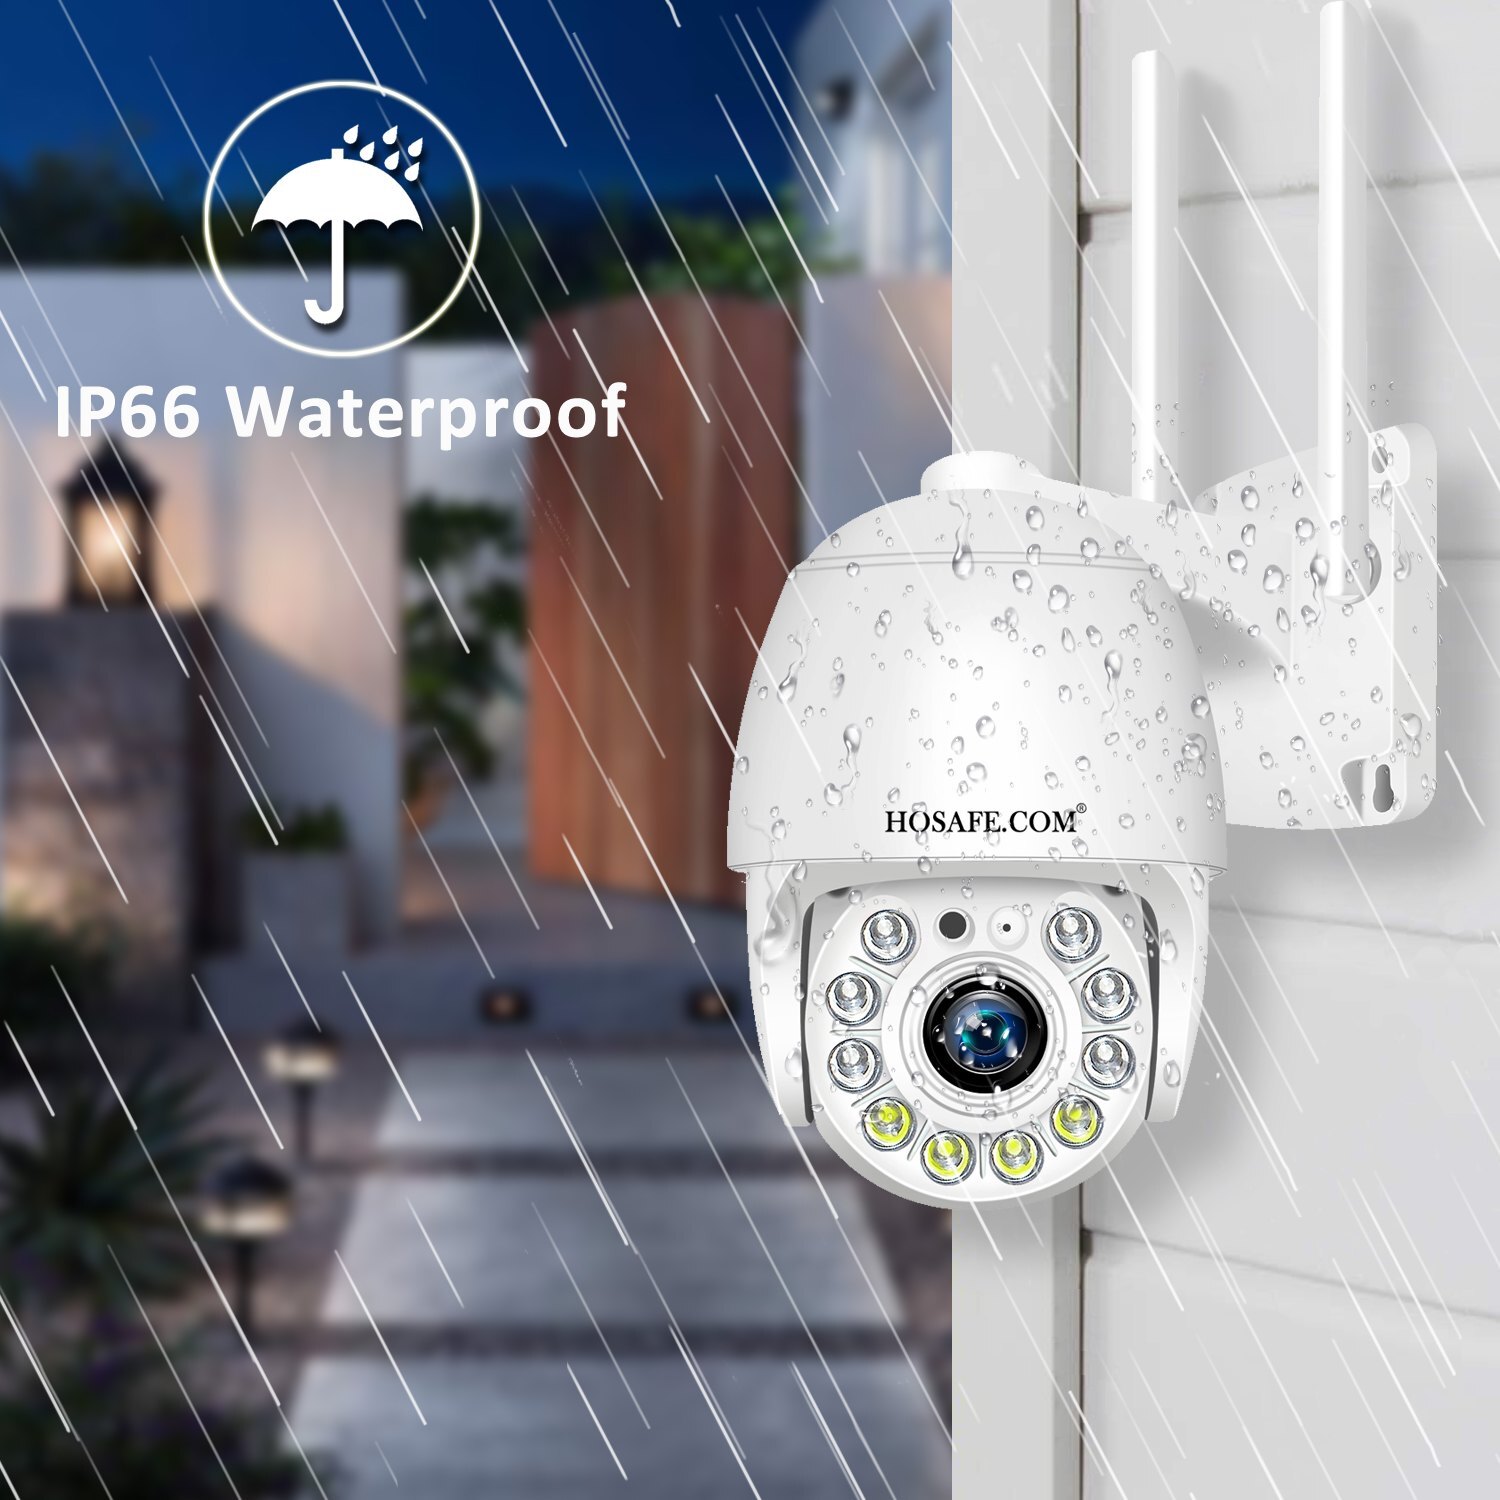 Outdoor Security Camera WiFi Wireless IP Surveillance Camera with Night Vision up to 65ft Motion Detection Alarm/Recording Support Max 64GB SD Card